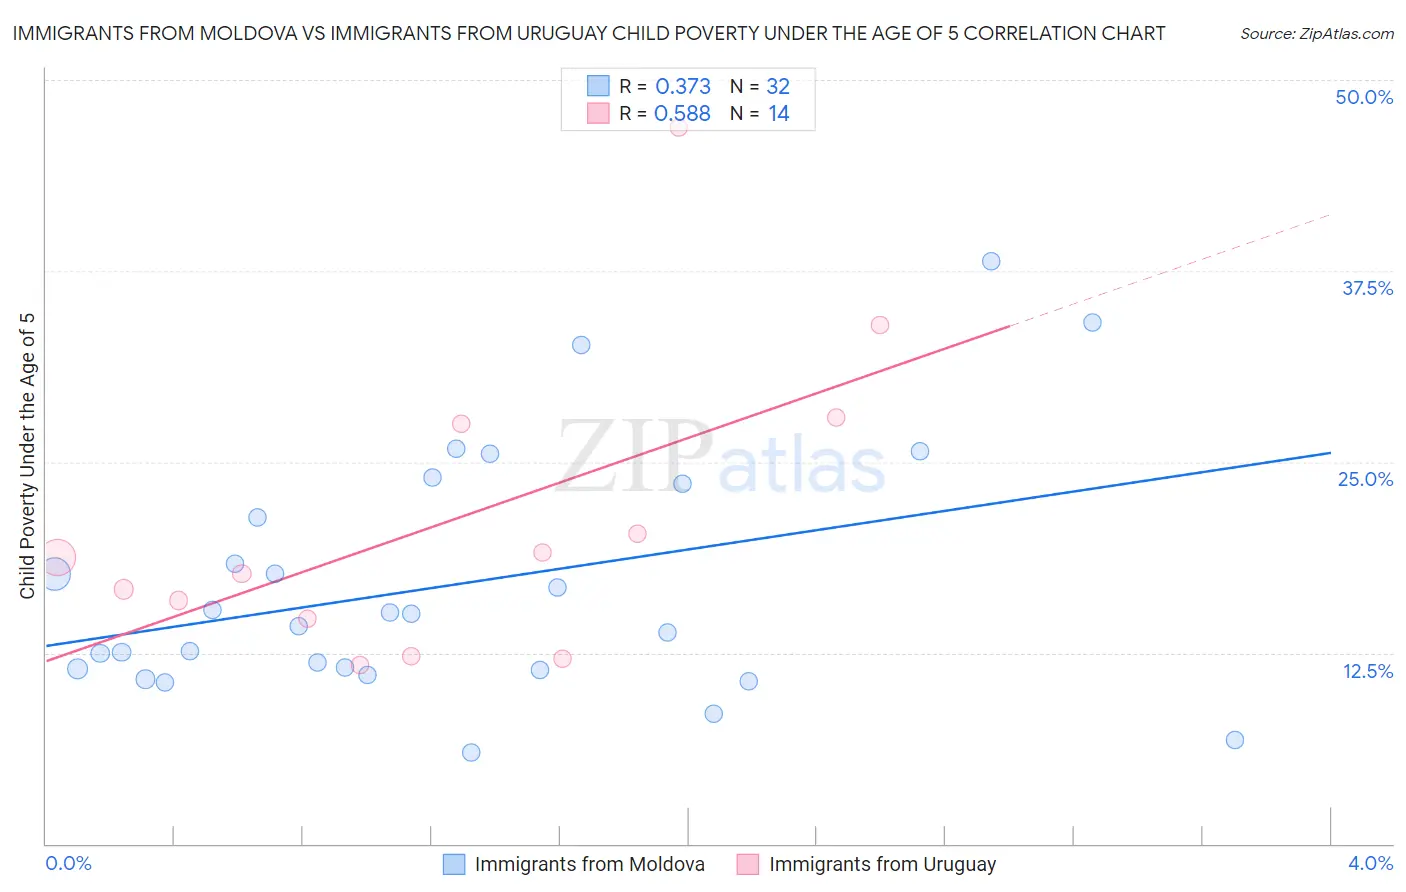 Immigrants from Moldova vs Immigrants from Uruguay Child Poverty Under the Age of 5